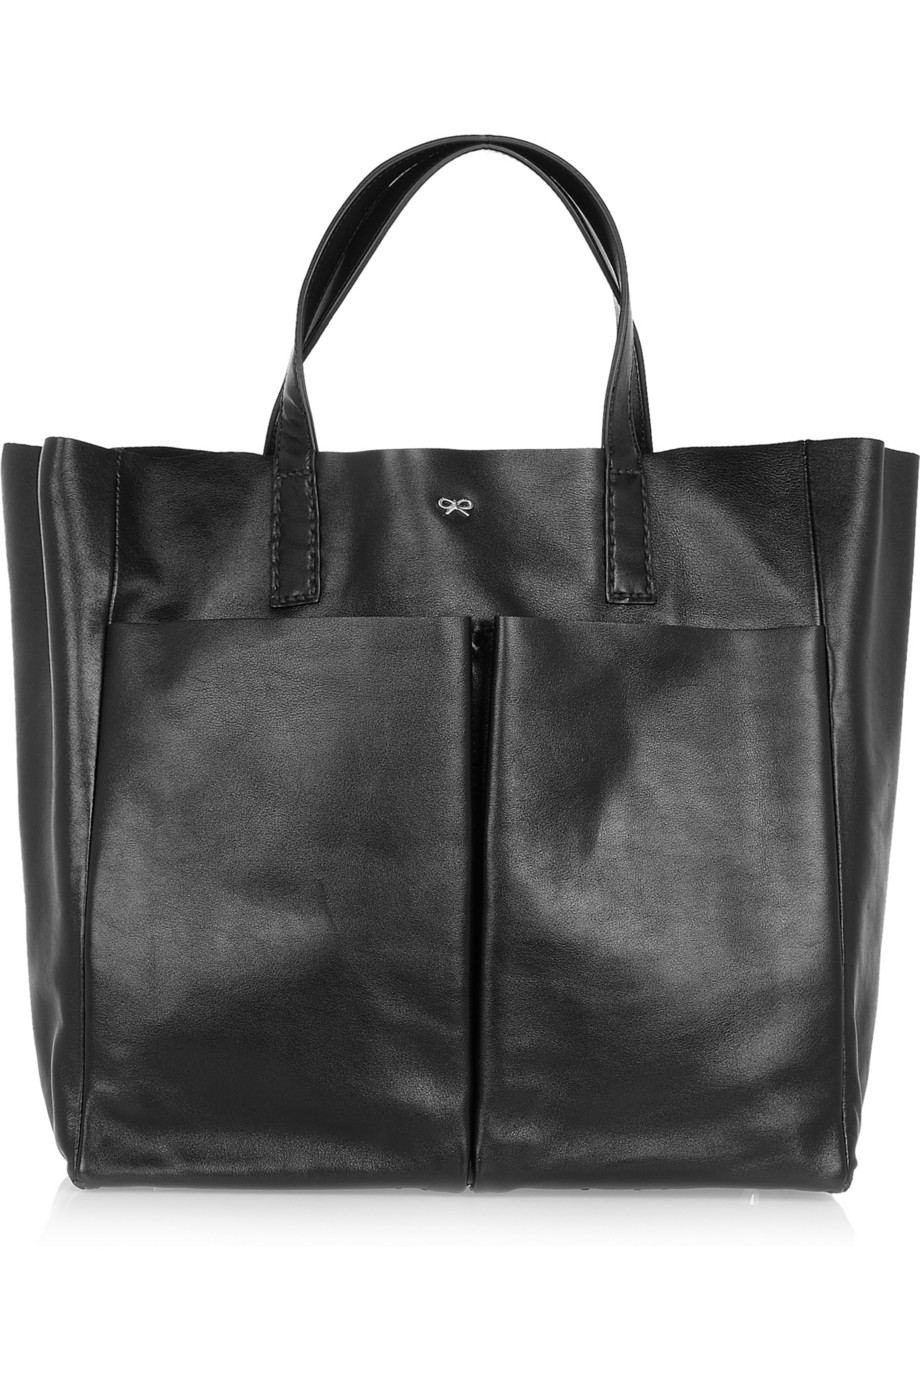 Lyst - Anya Hindmarch Nevis Leather Tote in Black